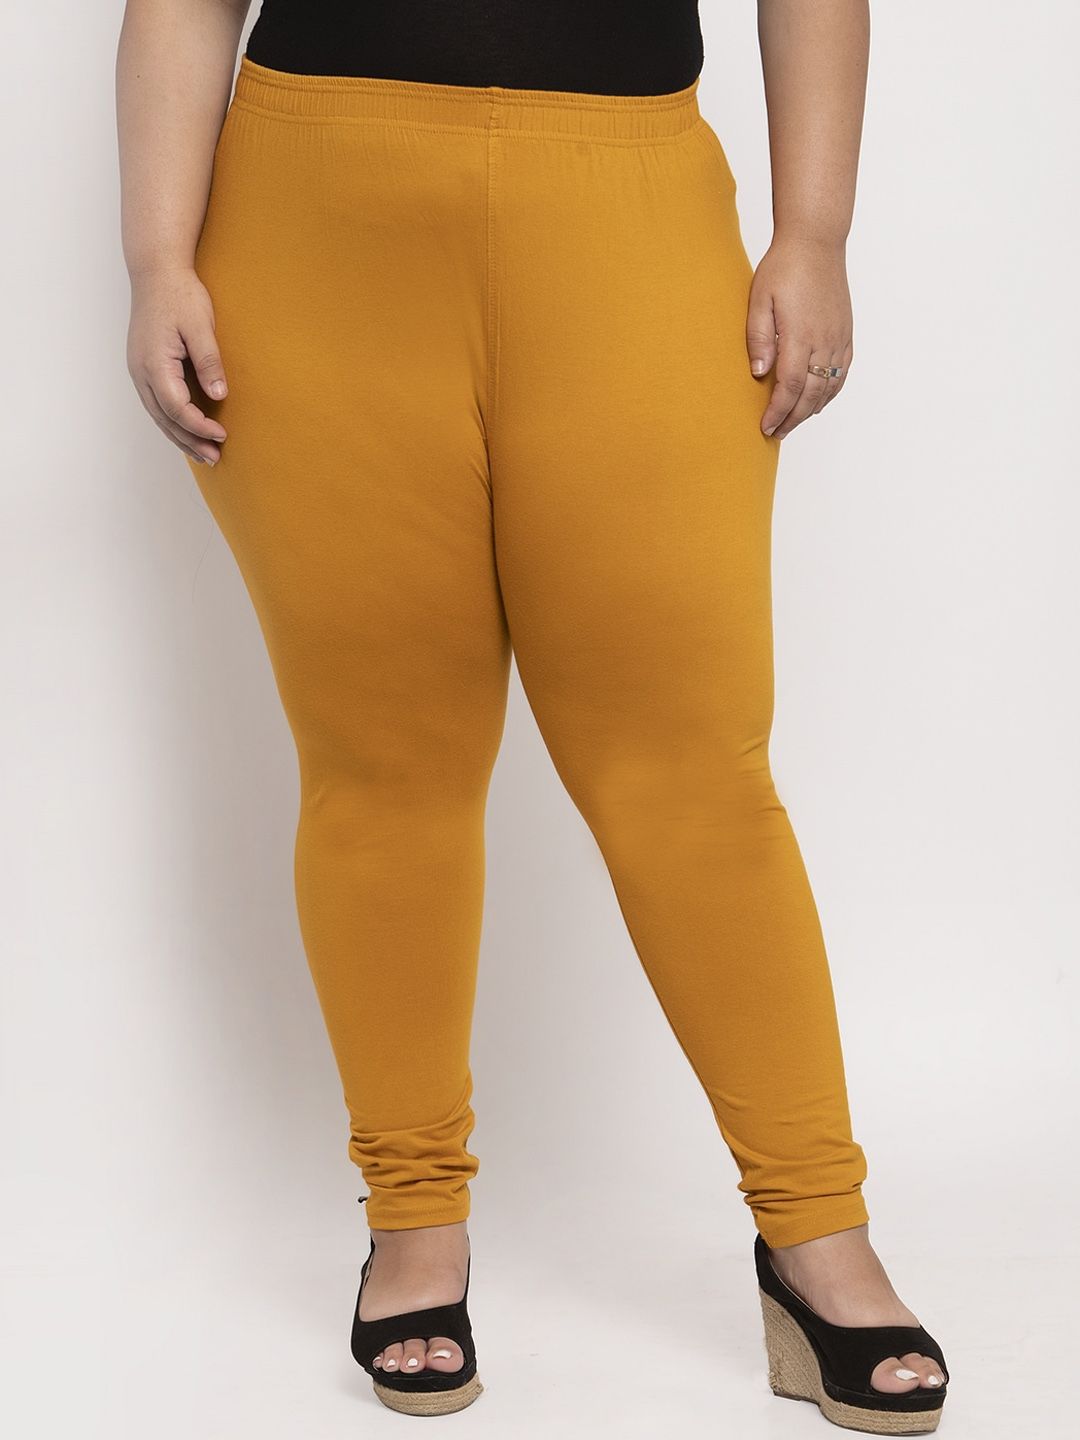 TAG 7 PLUS Women Mustard Yellow Solid Ankle-Length Plus Size Leggings Price in India